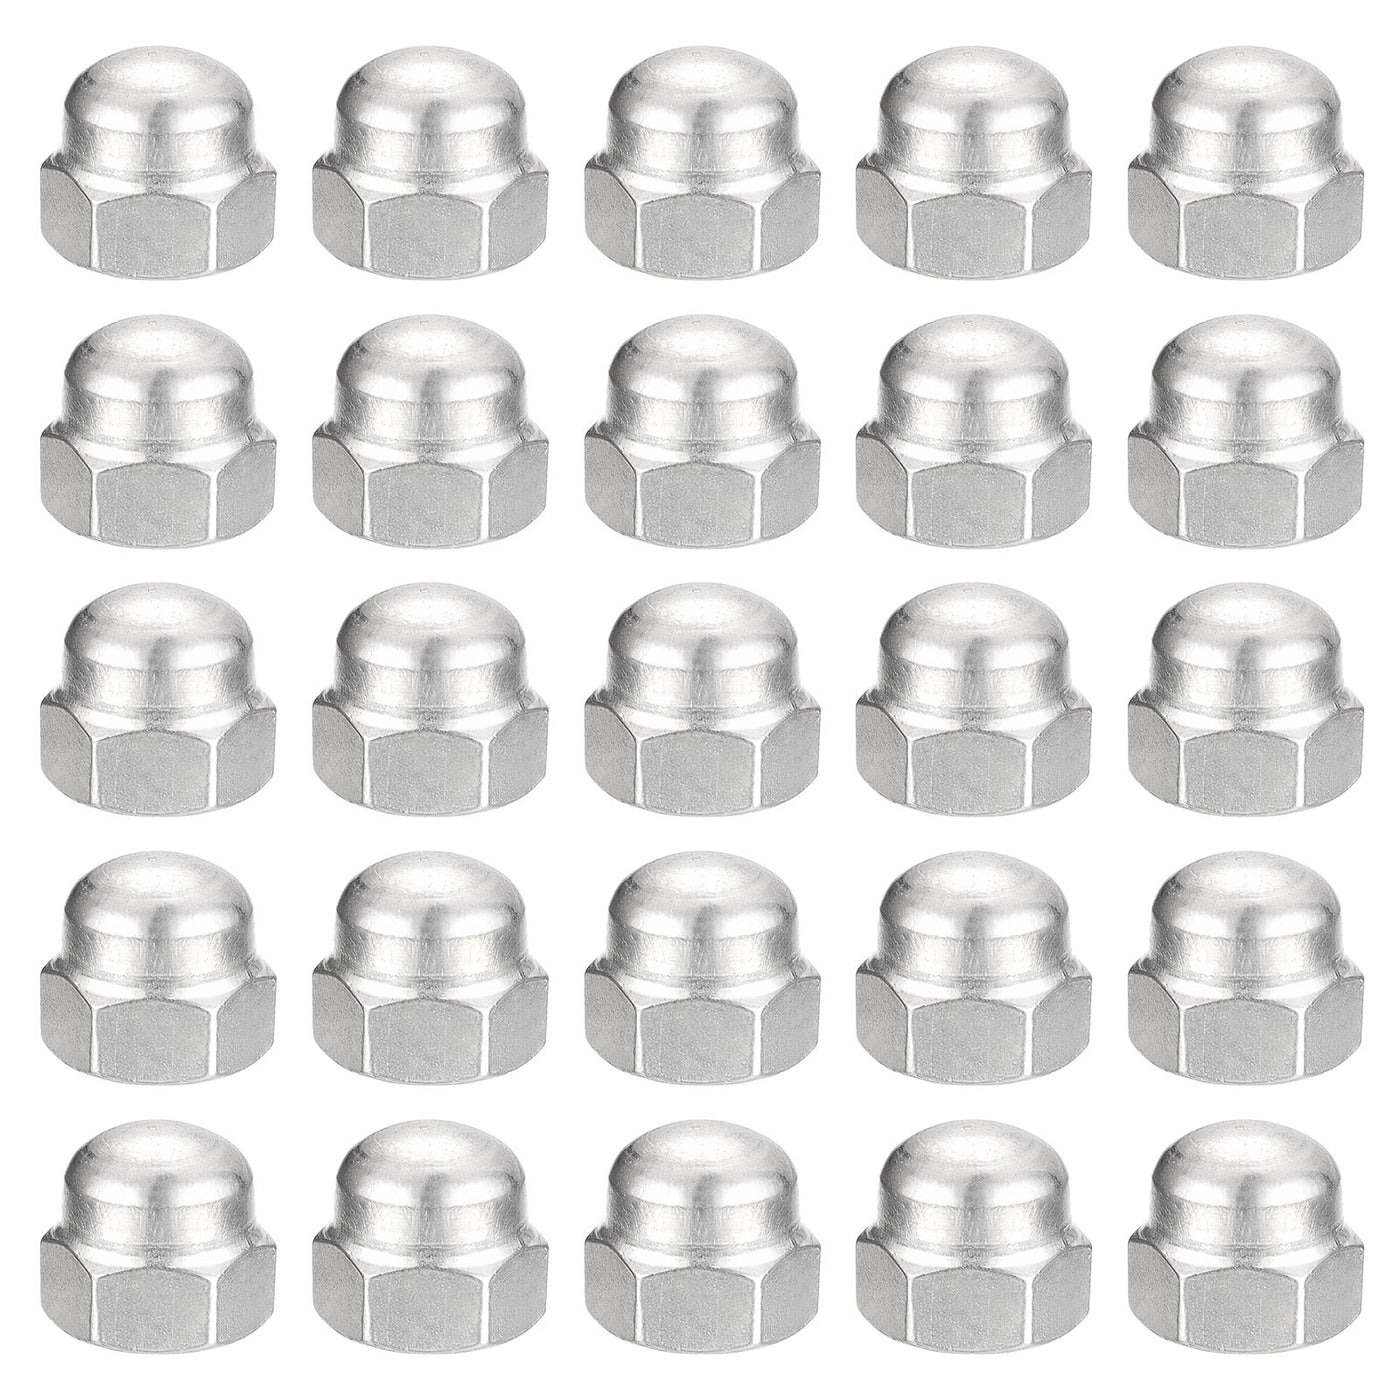 uxcell Uxcell 5/16-18 Acorn Cap Nuts,50pcs - 304 Stainless Steel Hardware Nuts, Acorn Hex Cap Dome Head Nuts for Fasteners (Silver)